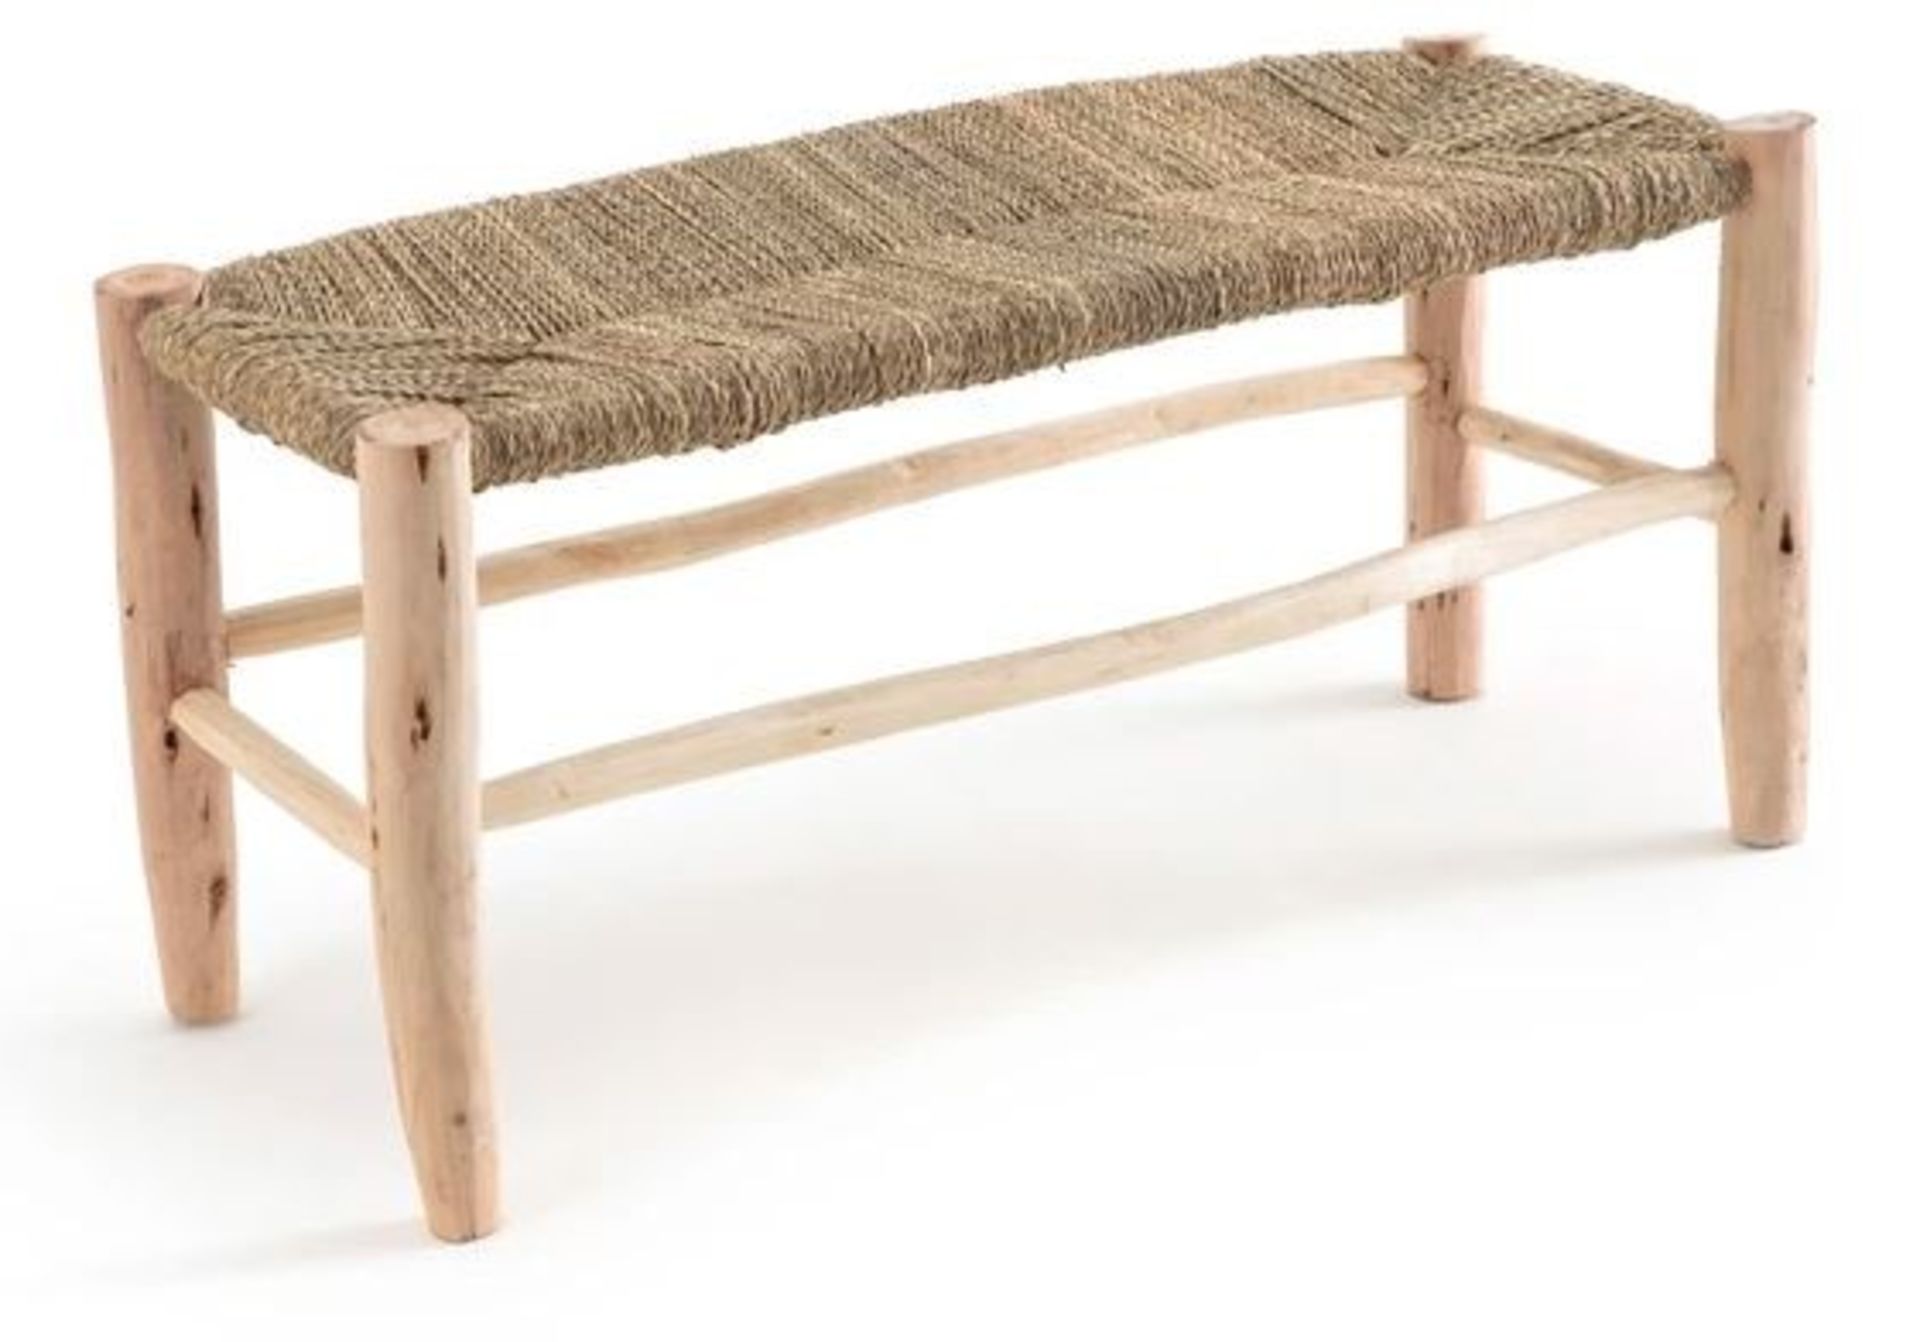 1 GRADE B ASSEMBLED DESIGNER GHADA RAW WILLOW WOOD BENCH IN NATURAL / RRP £145.00 **SMALL CRACK ON